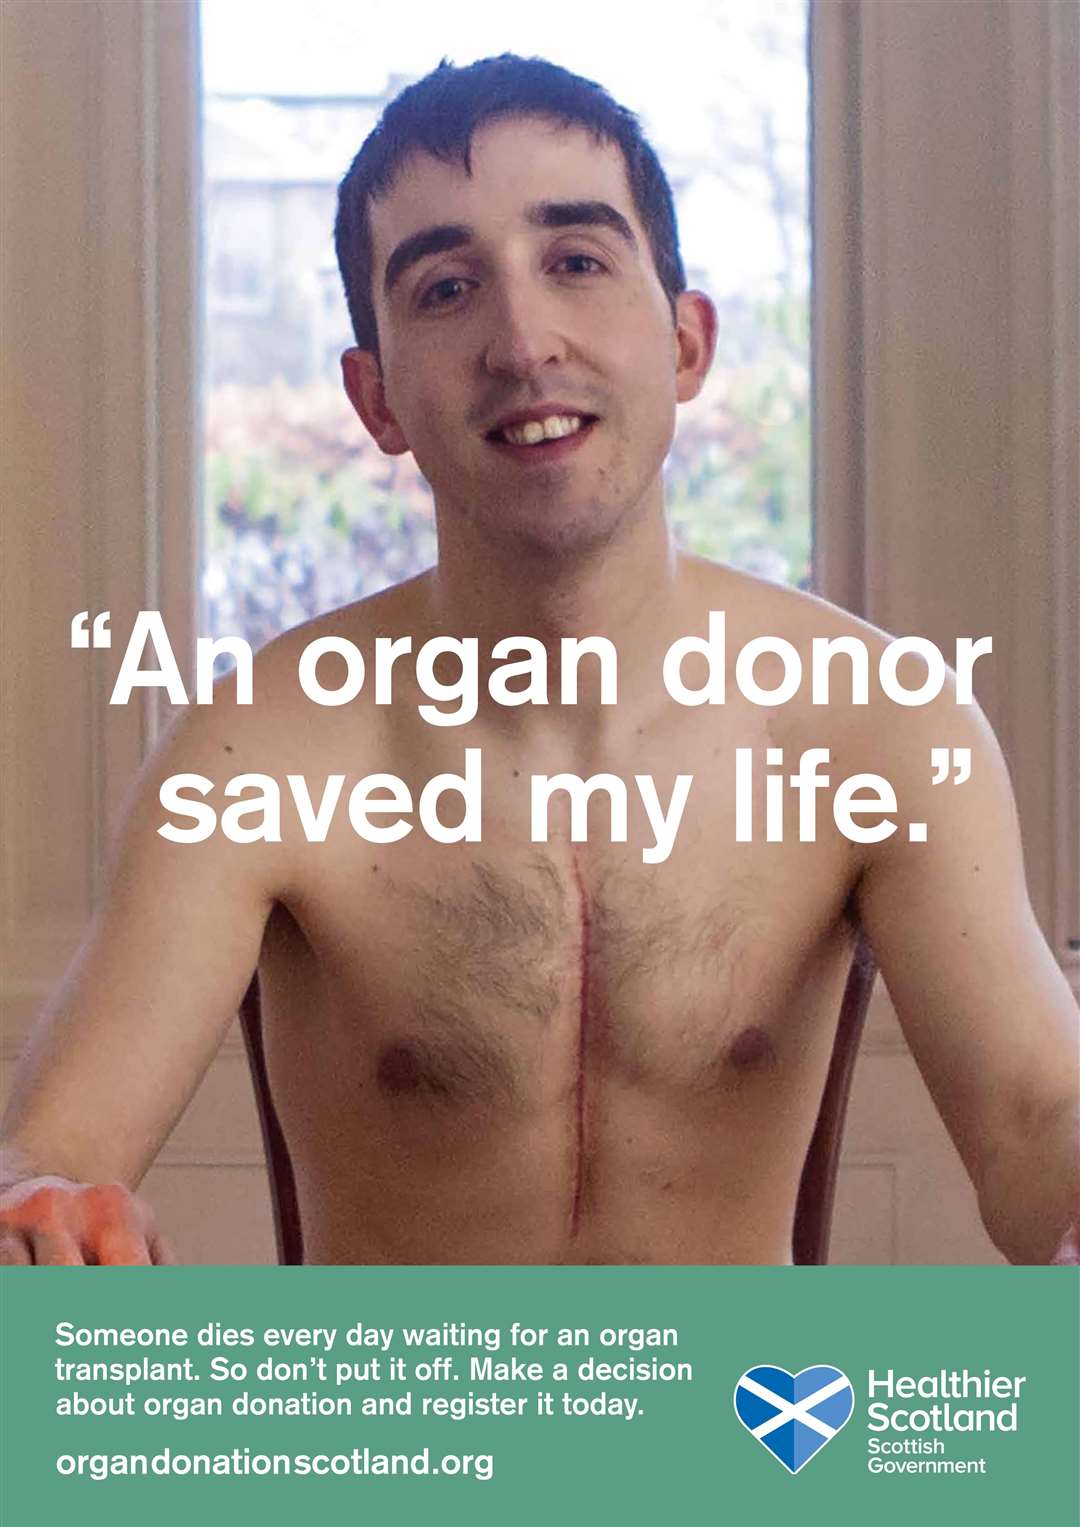 People's lives are transformed by organ donation.